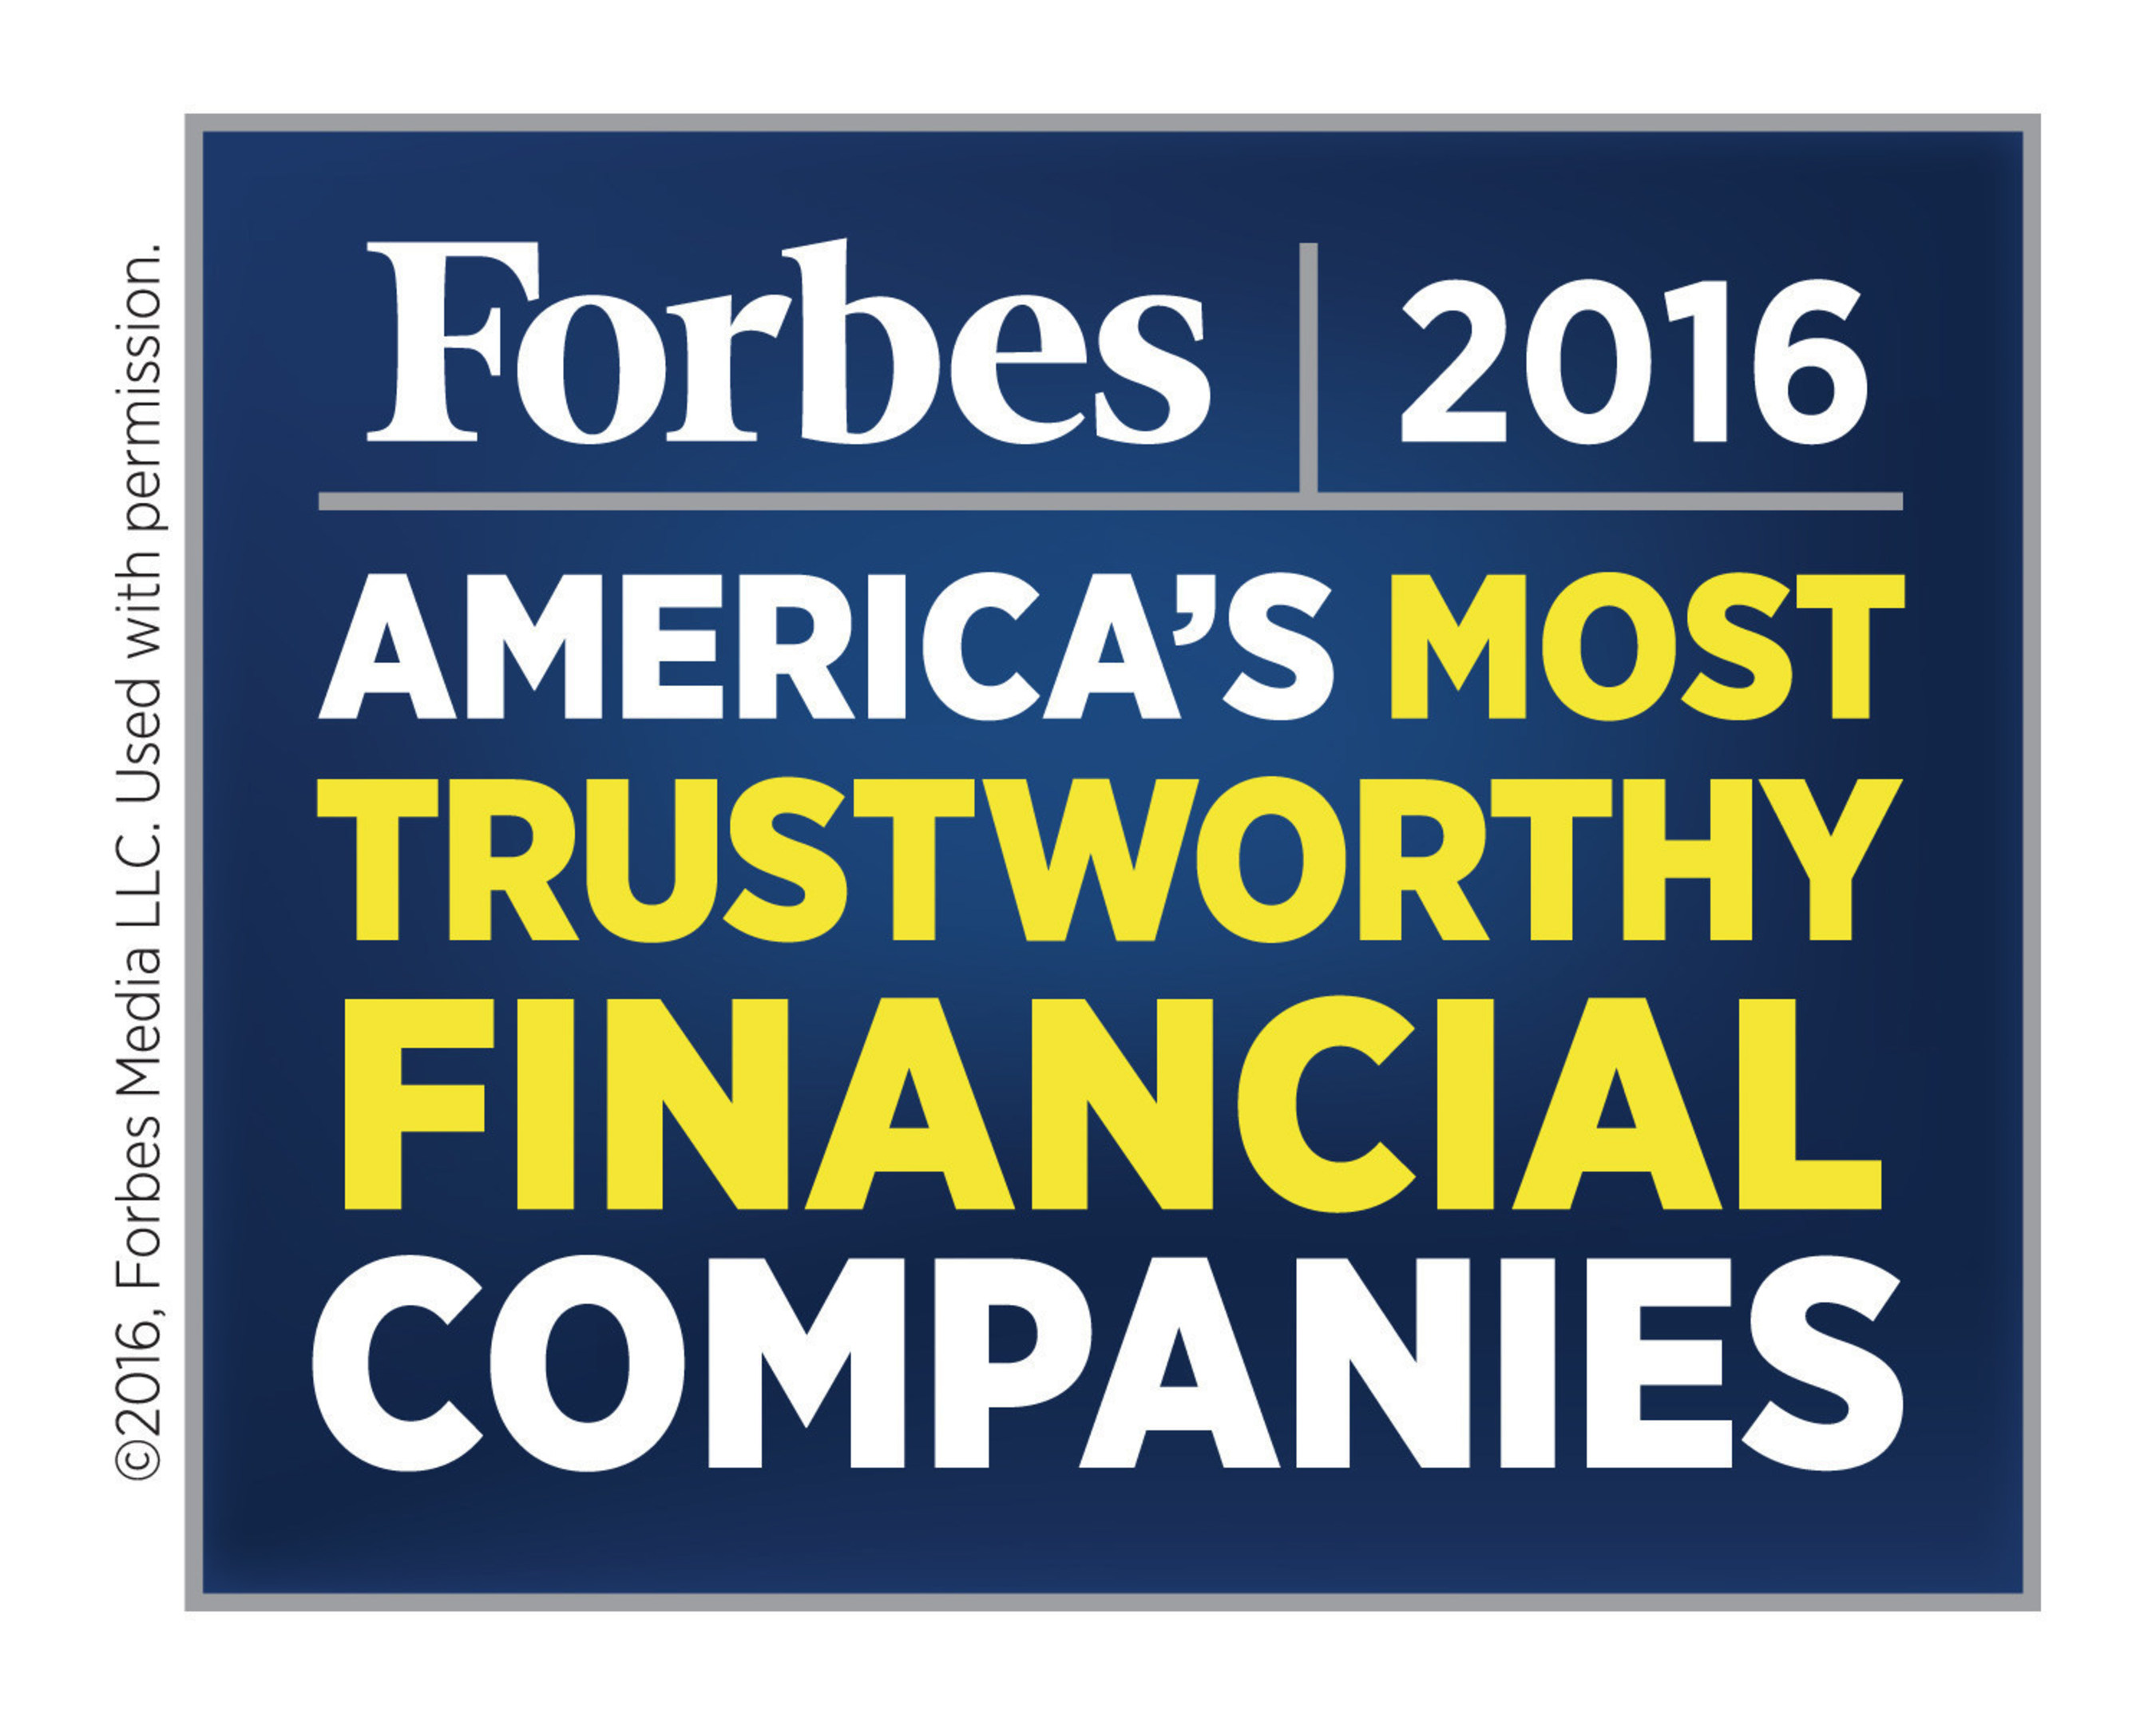 Northwest named one of American's Most Trustworthy Financial Companies by Forbes